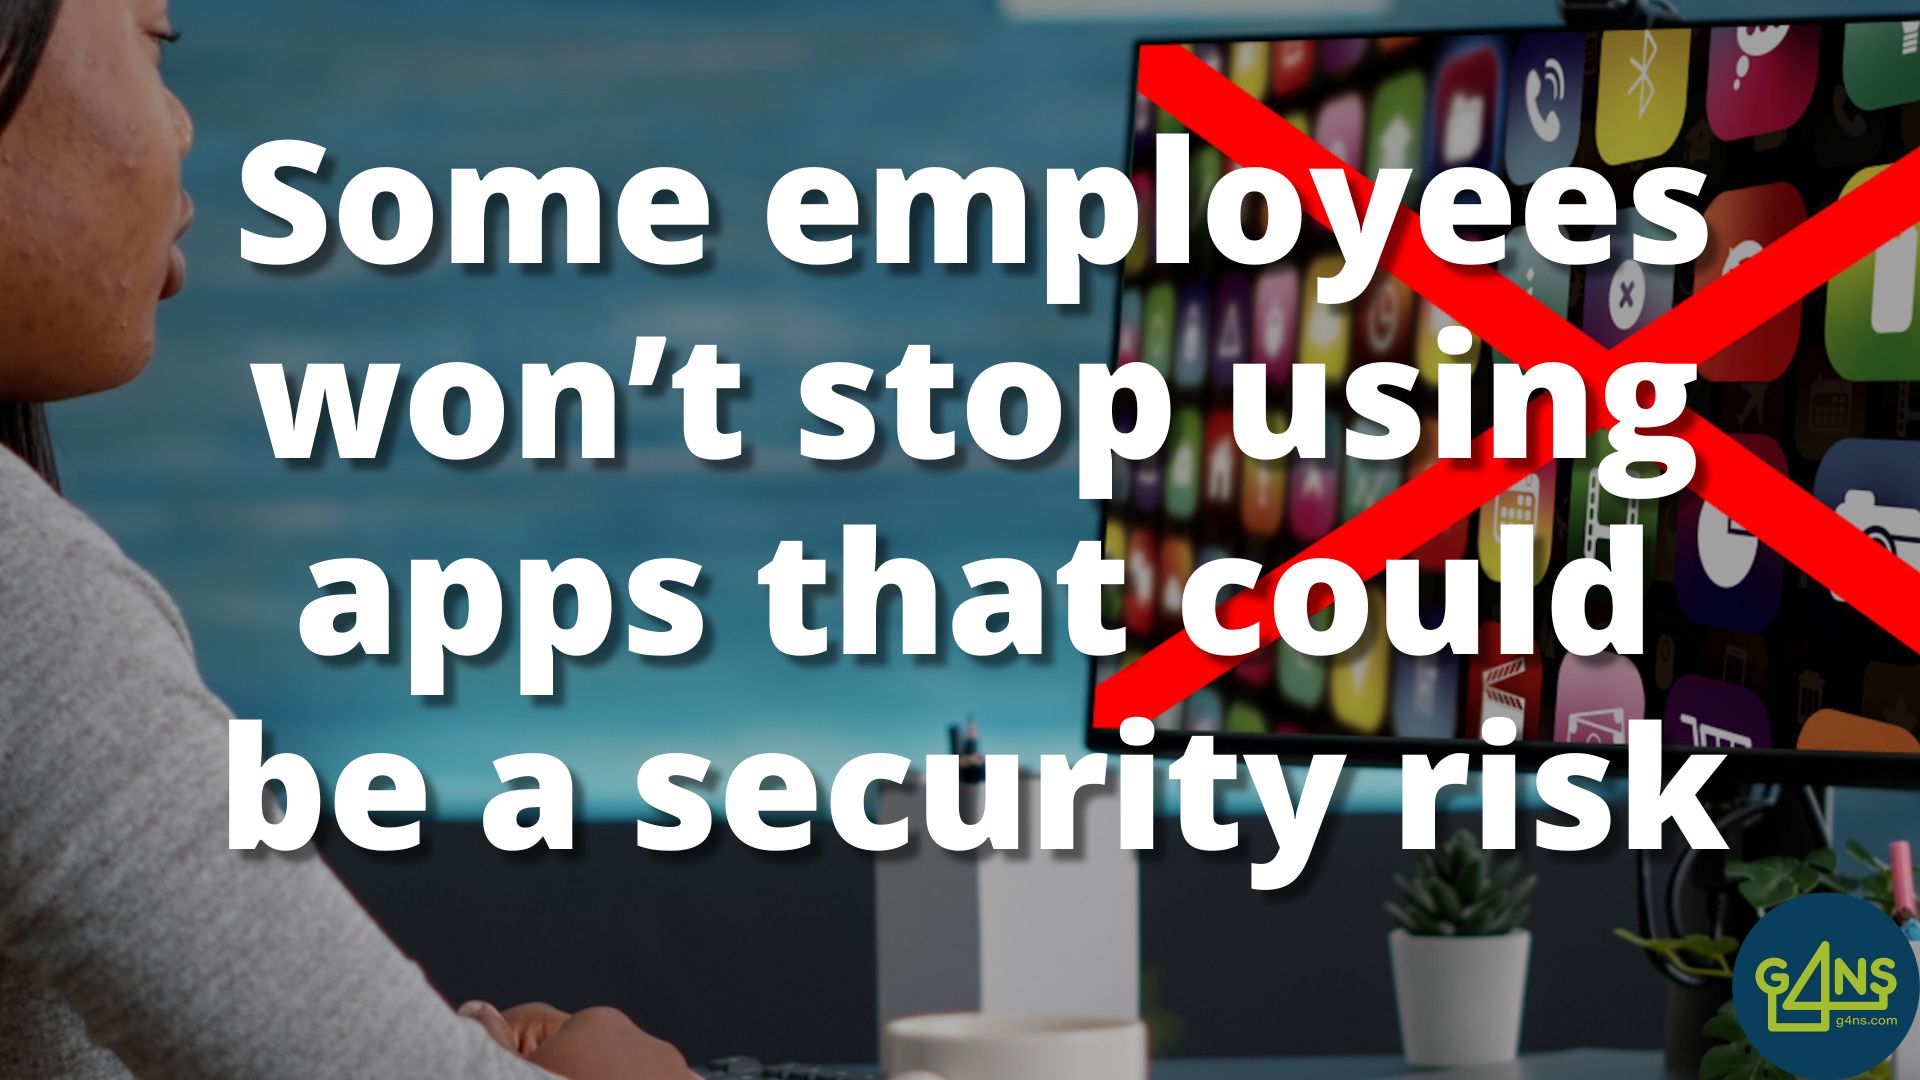 Some employees won’t stop using app that could be a security risk